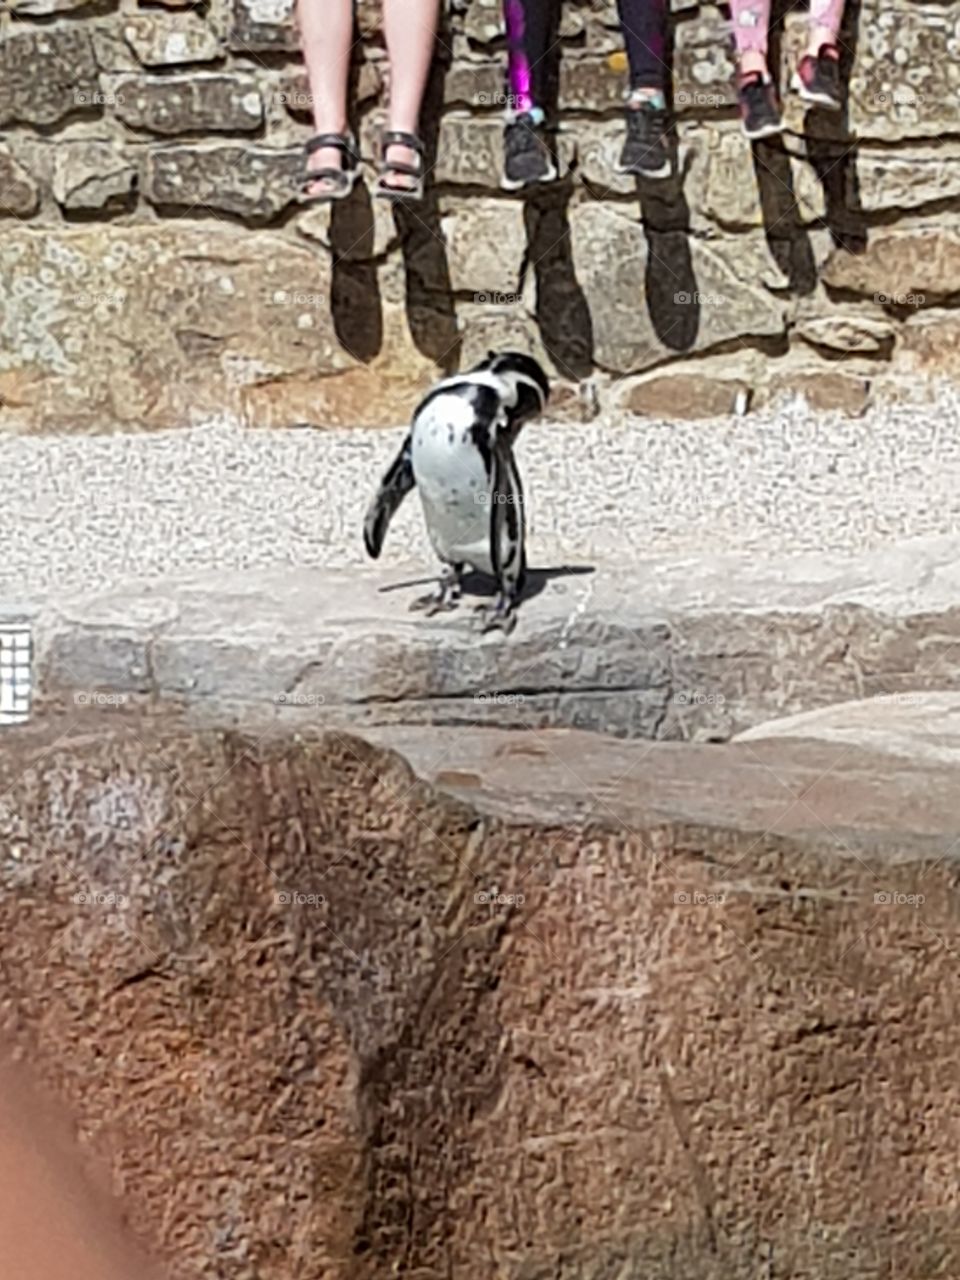 Penguin at Paradise Park in Hayle, Cornwall